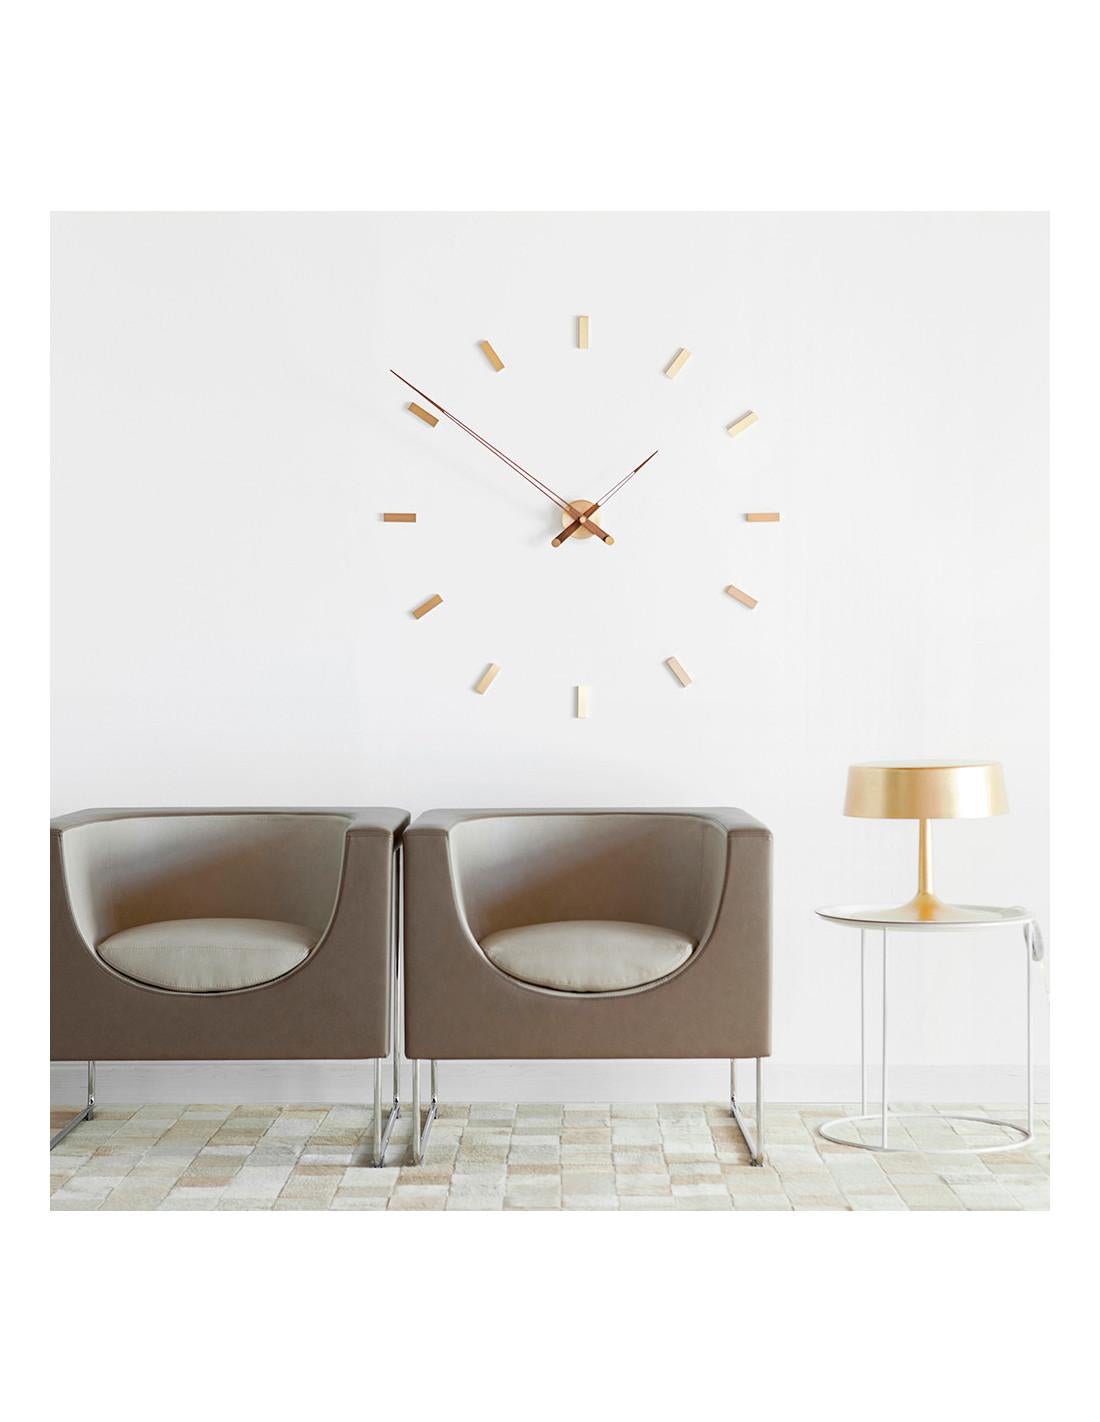 Wall clock with rectangular metal time signals that form the structure of the clock on the wall. The case is polished brass and the hands are walnut with golden counterweights.
Tacón 12 Gold N wall clock: Wood and polished brass.
Each clock is a